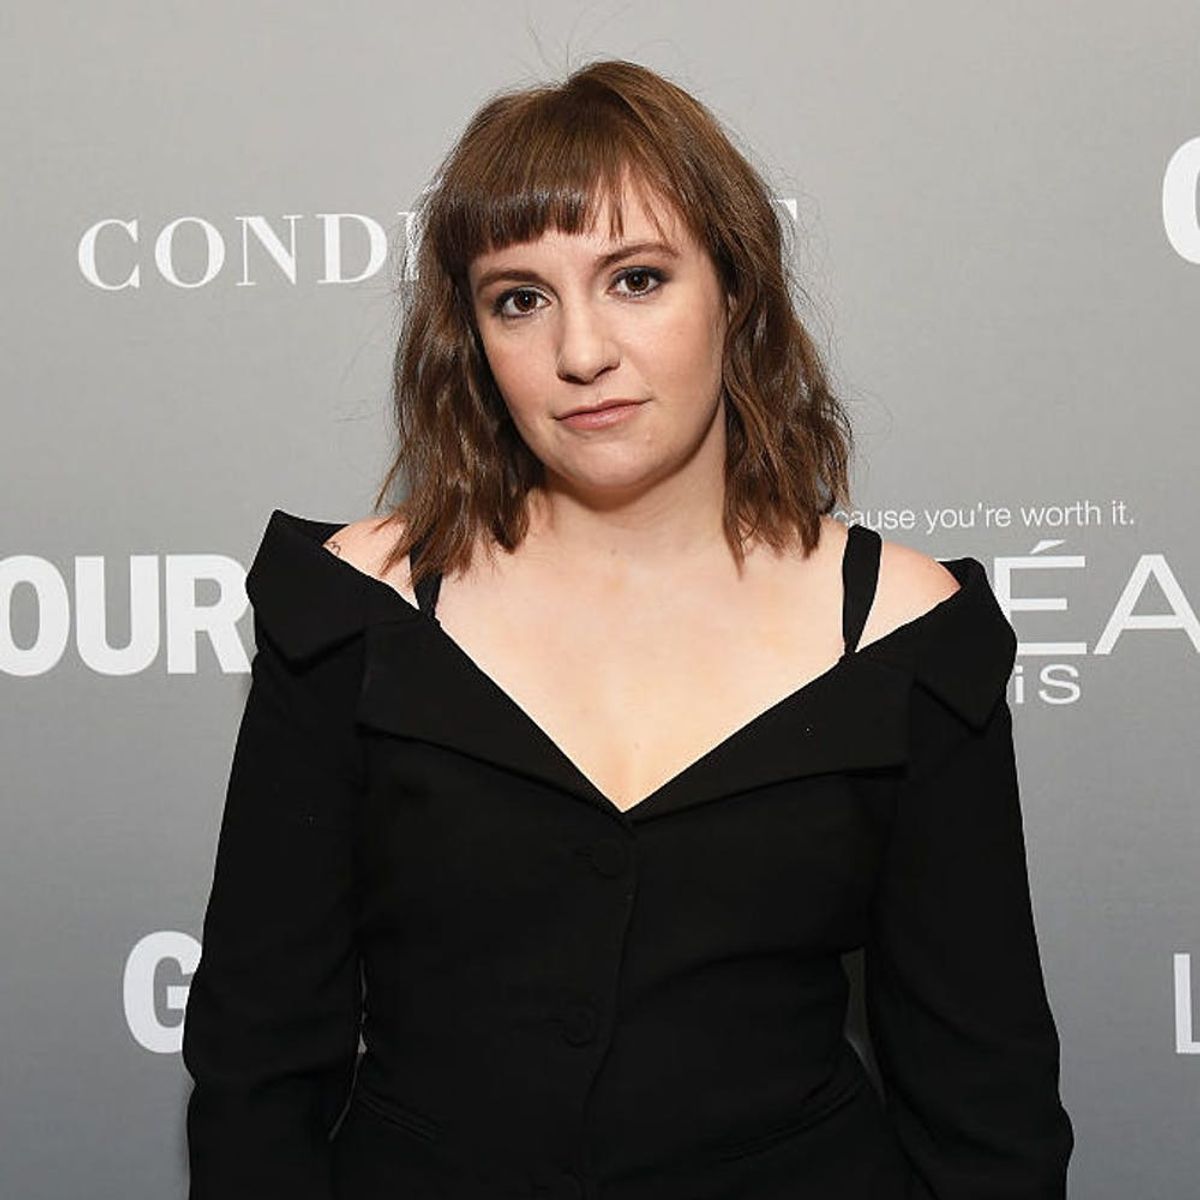 Lena Dunham Calls Out Two American Airlines Flight Attendants for “Transphobic Talk”